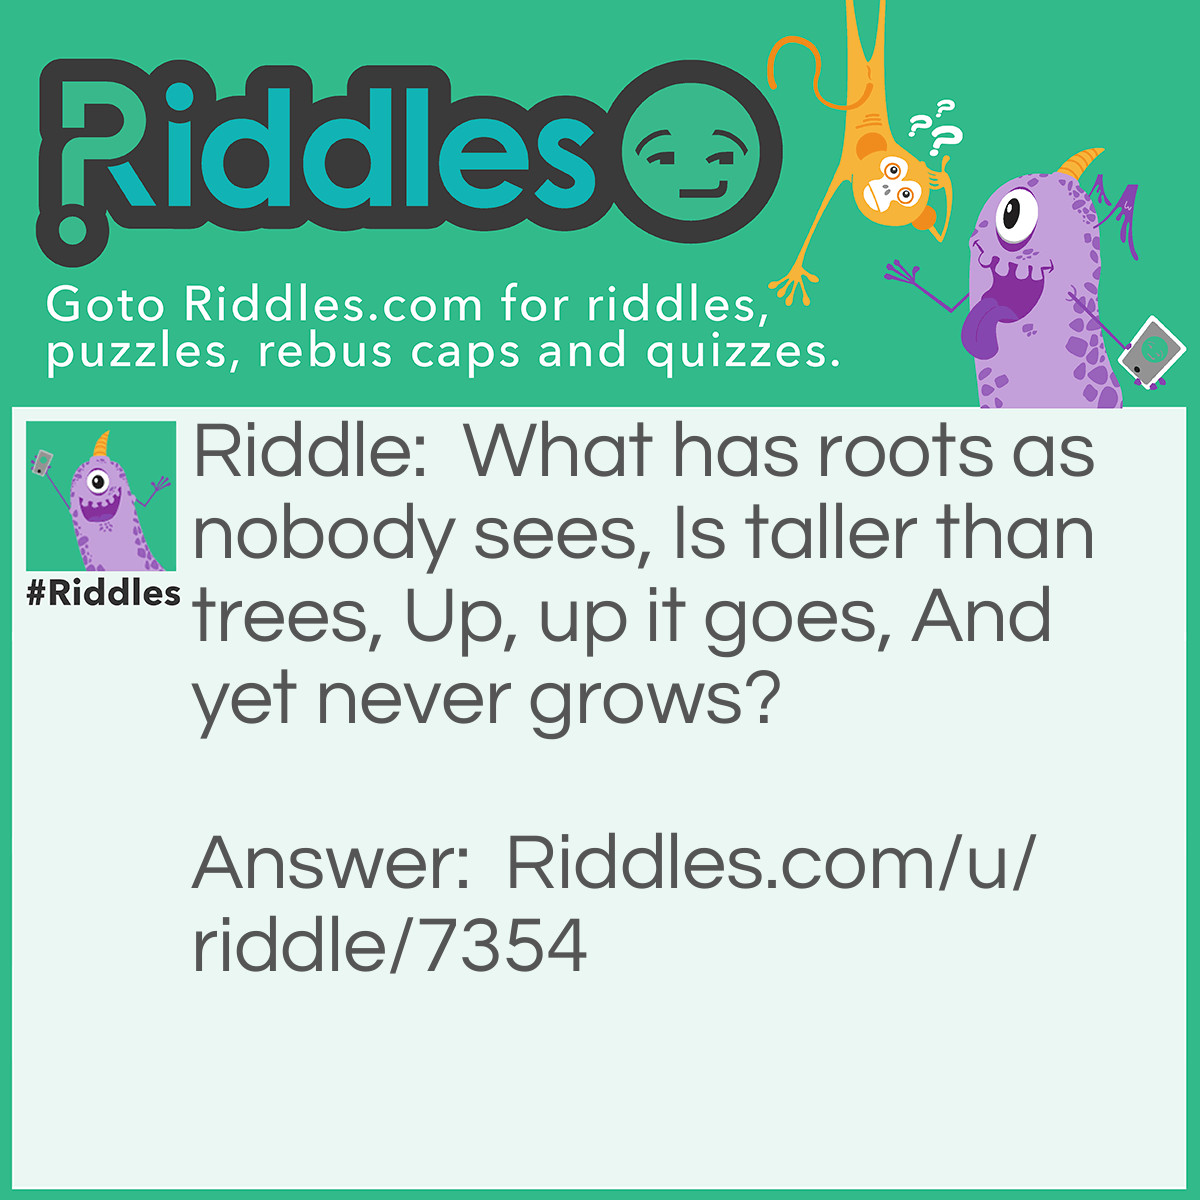 Riddle: What has roots as nobody sees, Is taller than trees, Up, up it goes, And yet never grows? Answer: A Mountain.